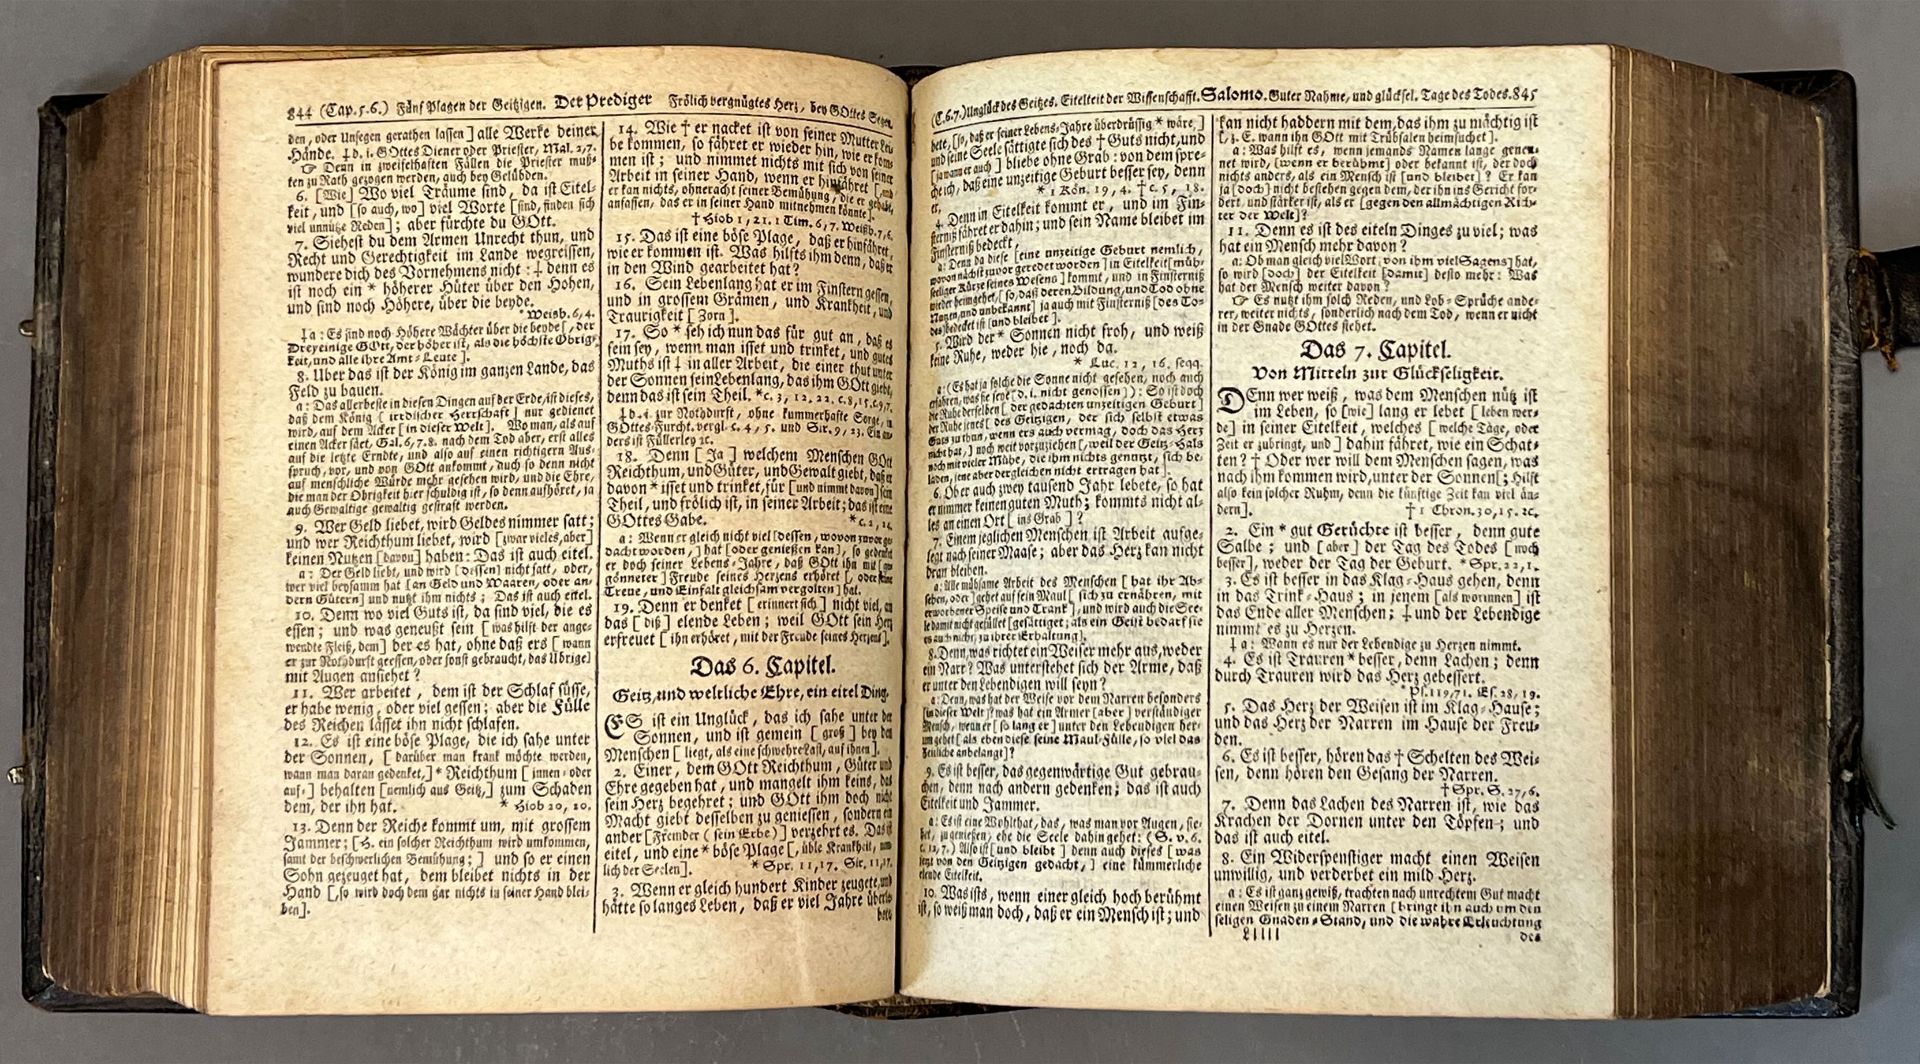 Bible. "This is: The whole Holy Scripture". 1740. - Image 6 of 12